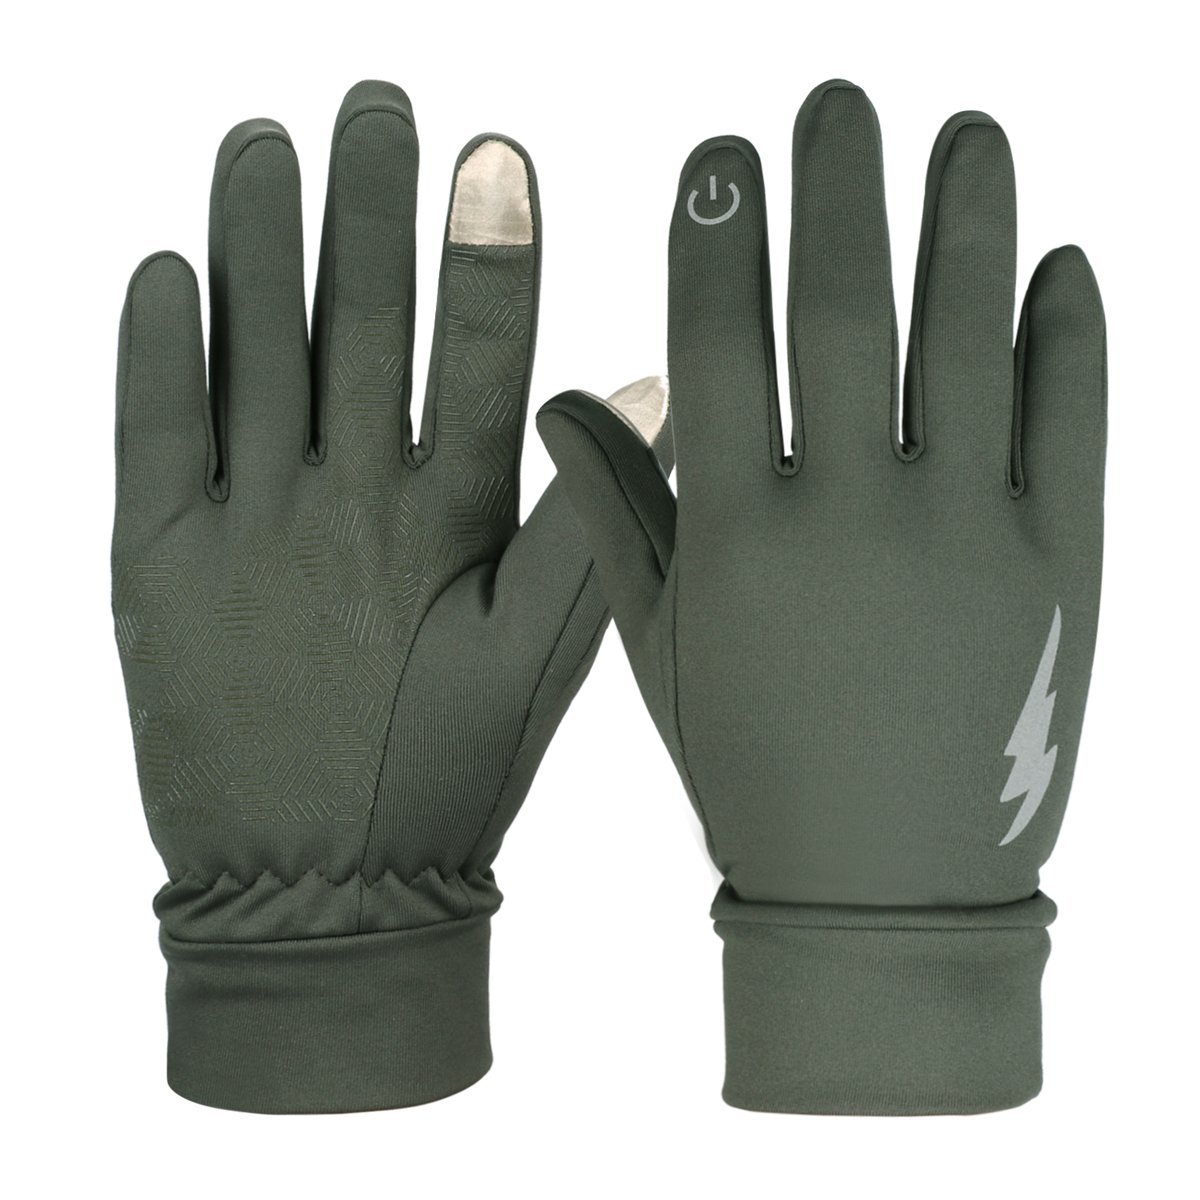 HiCool Winter Thermal Gloves - 08 - army green color